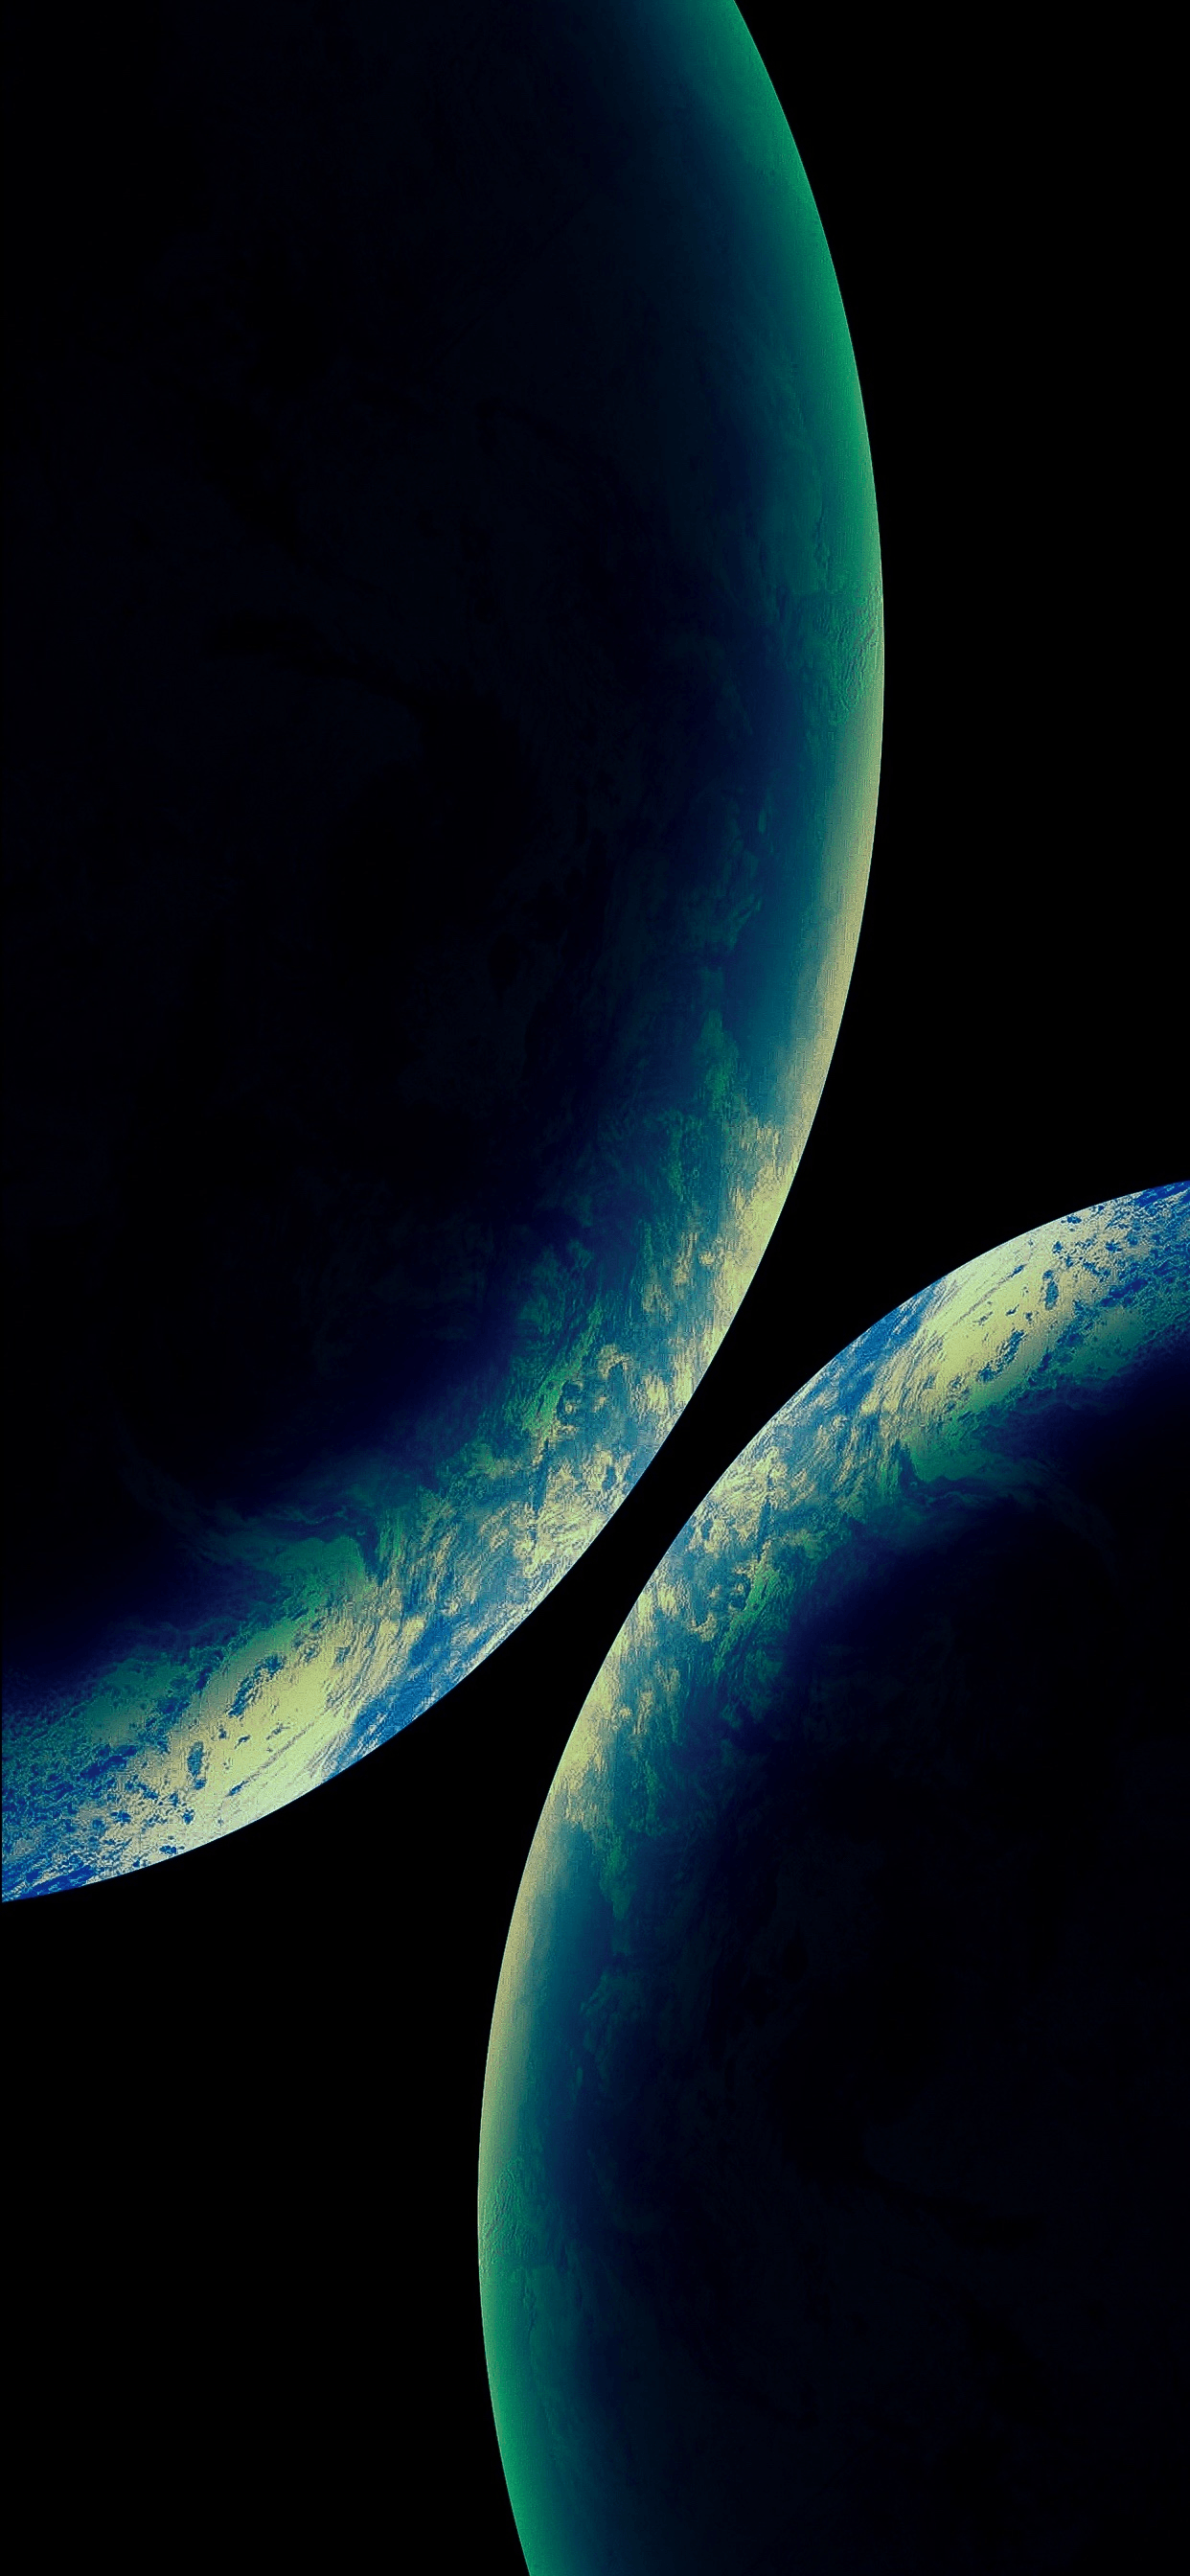 iPhone Planet Hd Wallpapers - Wallpaper Cave